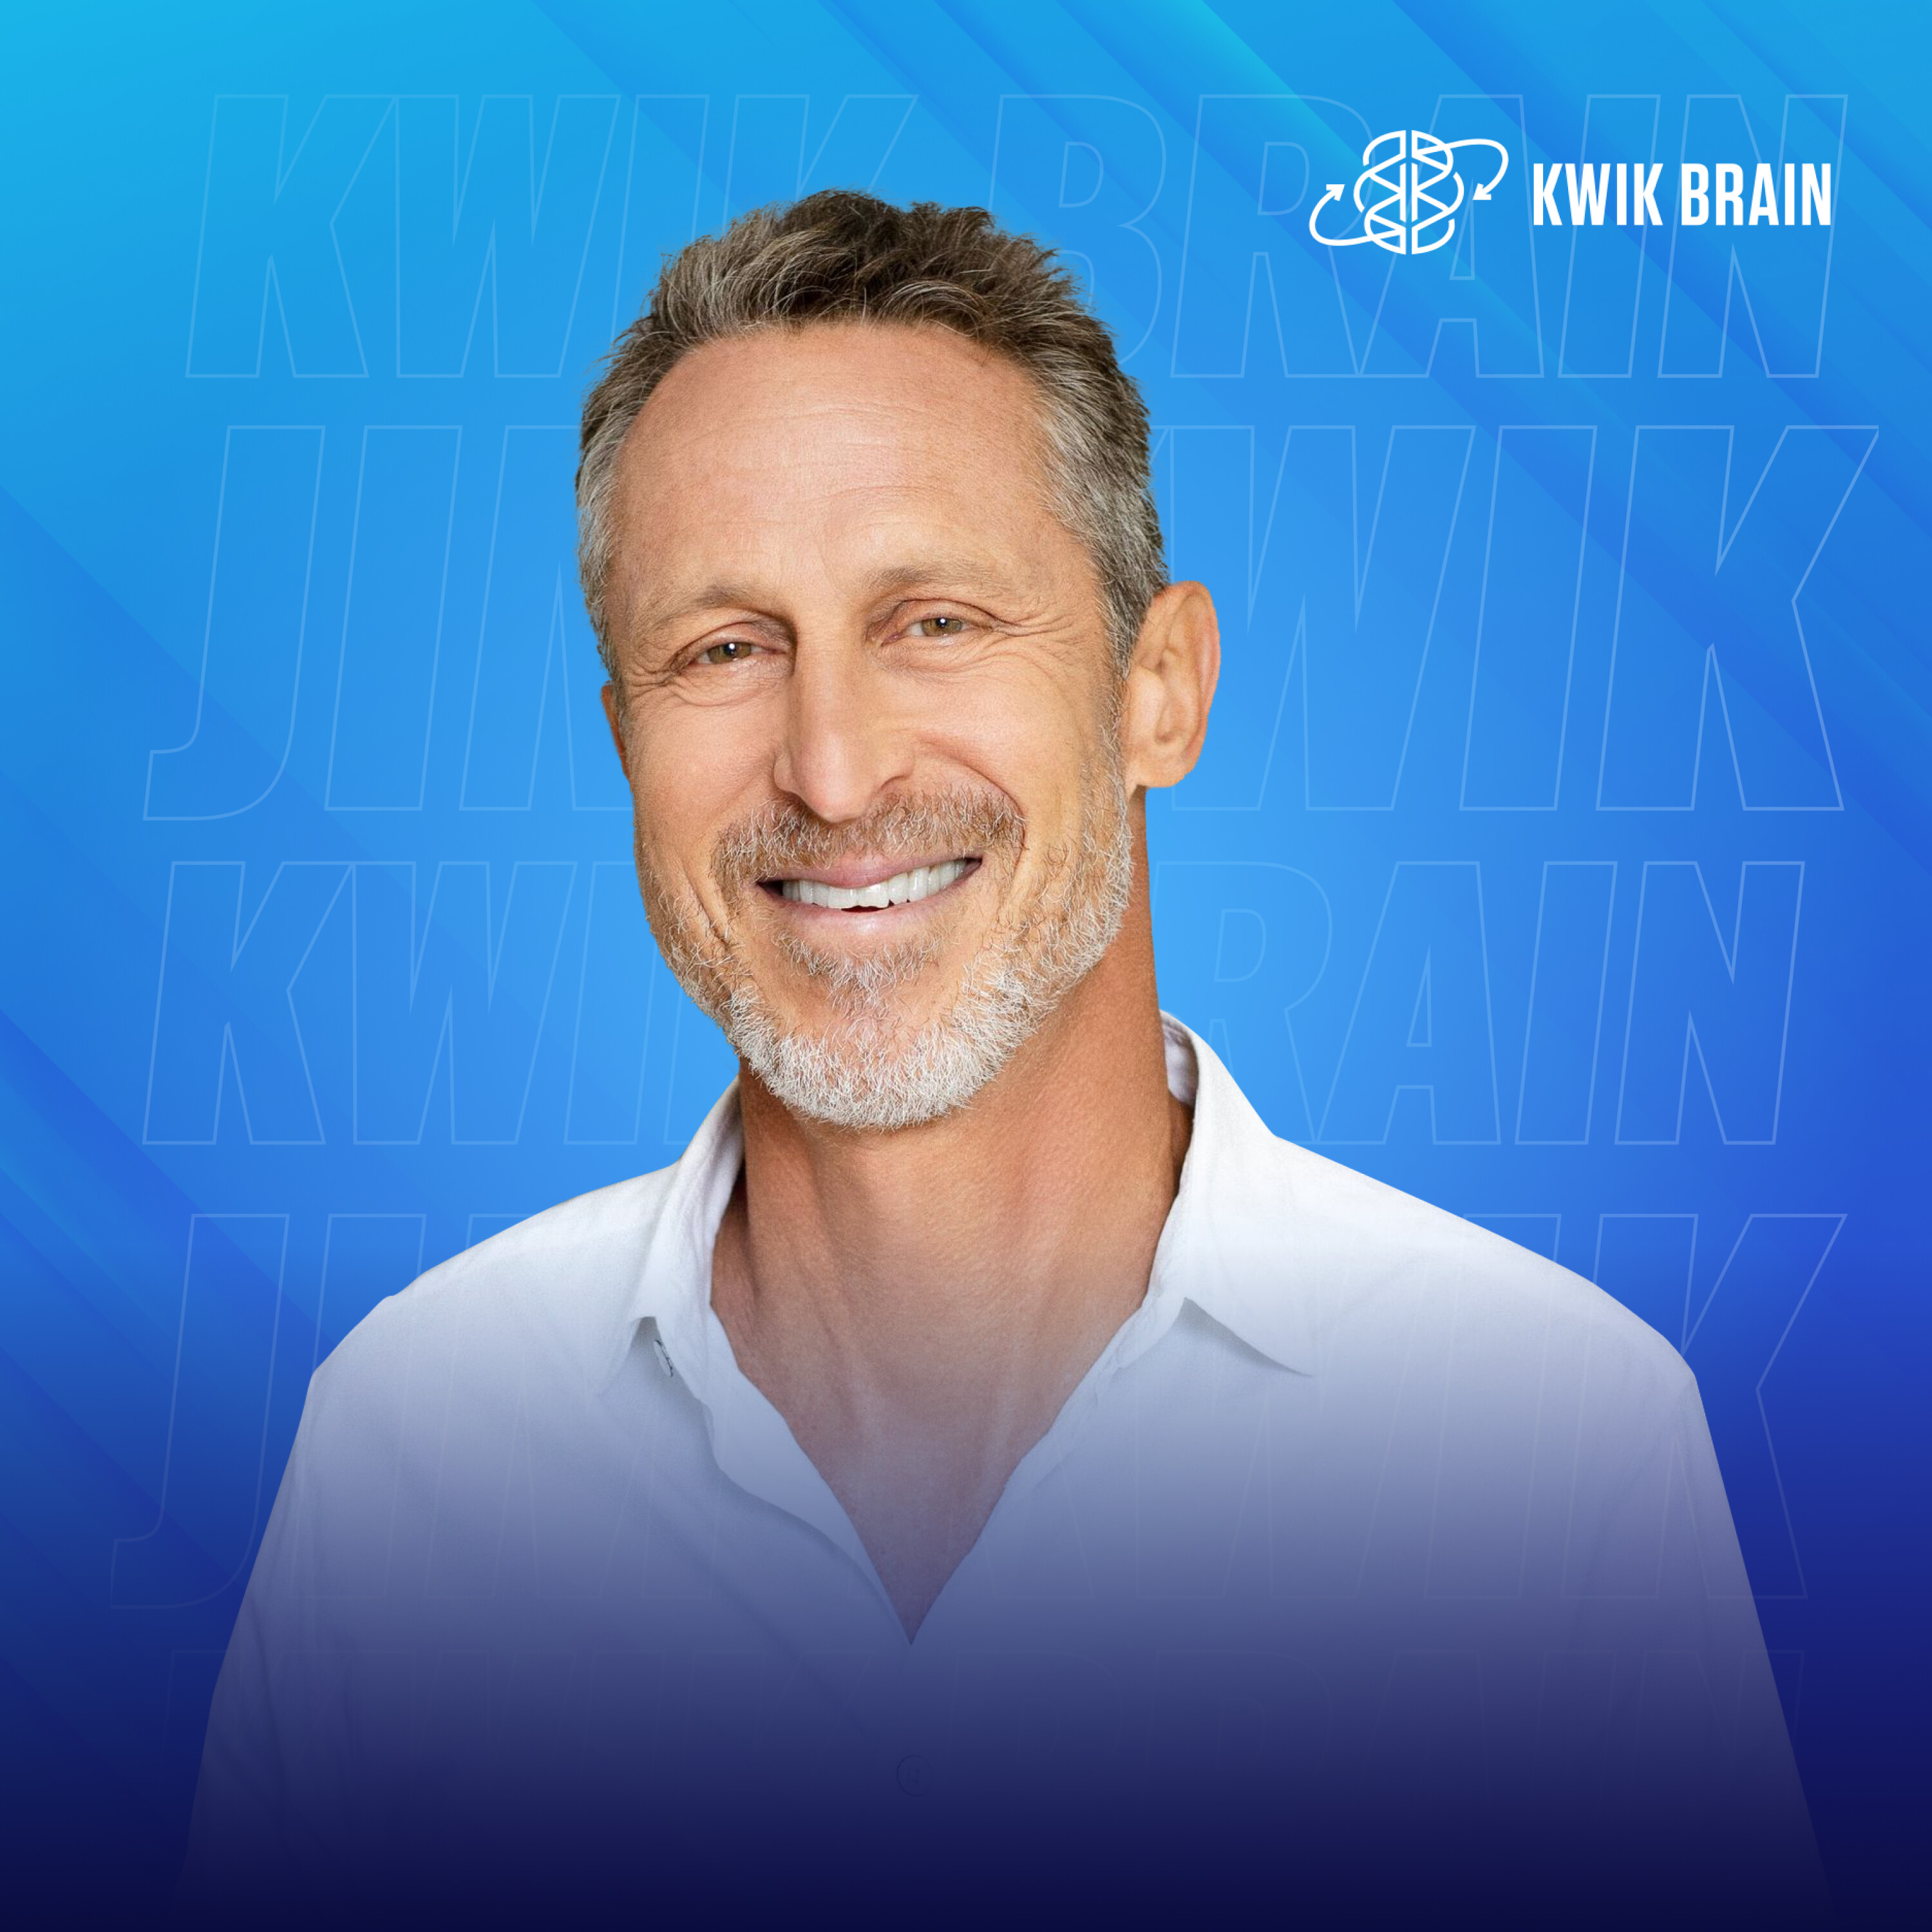 Fix Your Food to Fix Your Brain with Dr. Mark Hyman